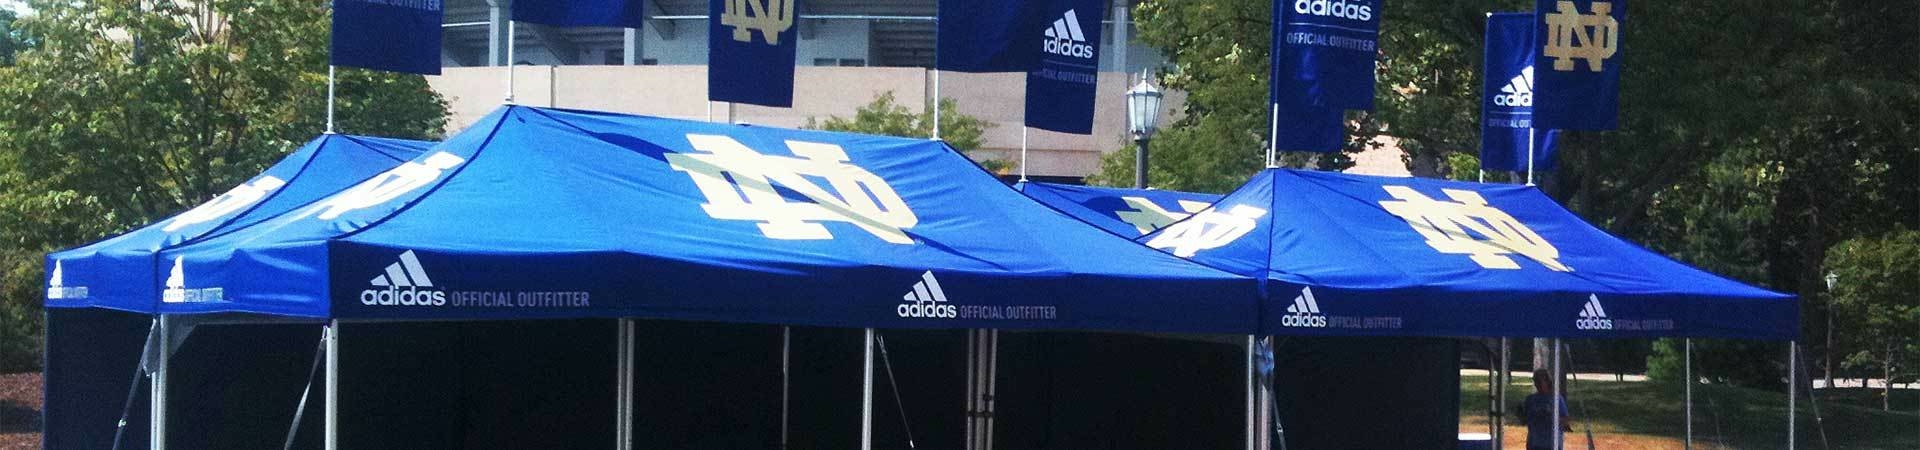 Large custom printed tents with university logo on top.